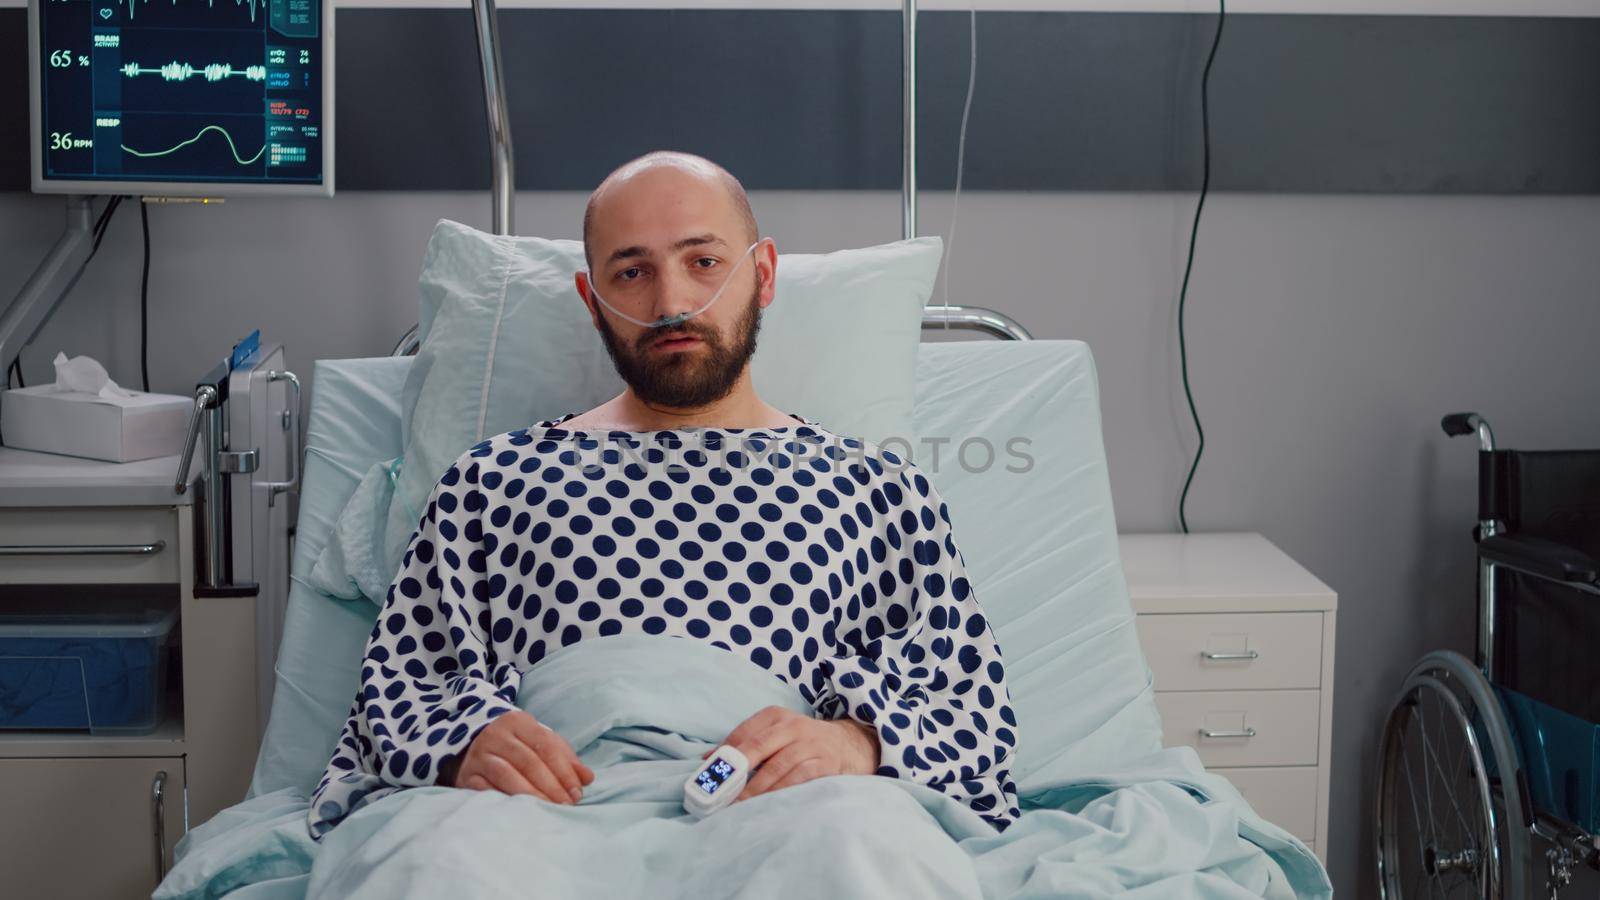 Potrait of sick man wearing nasal oxygen tube having respiratory disease lying in bed during recovering treatment. Patient waiting for physician while looking at camera in hospital ward